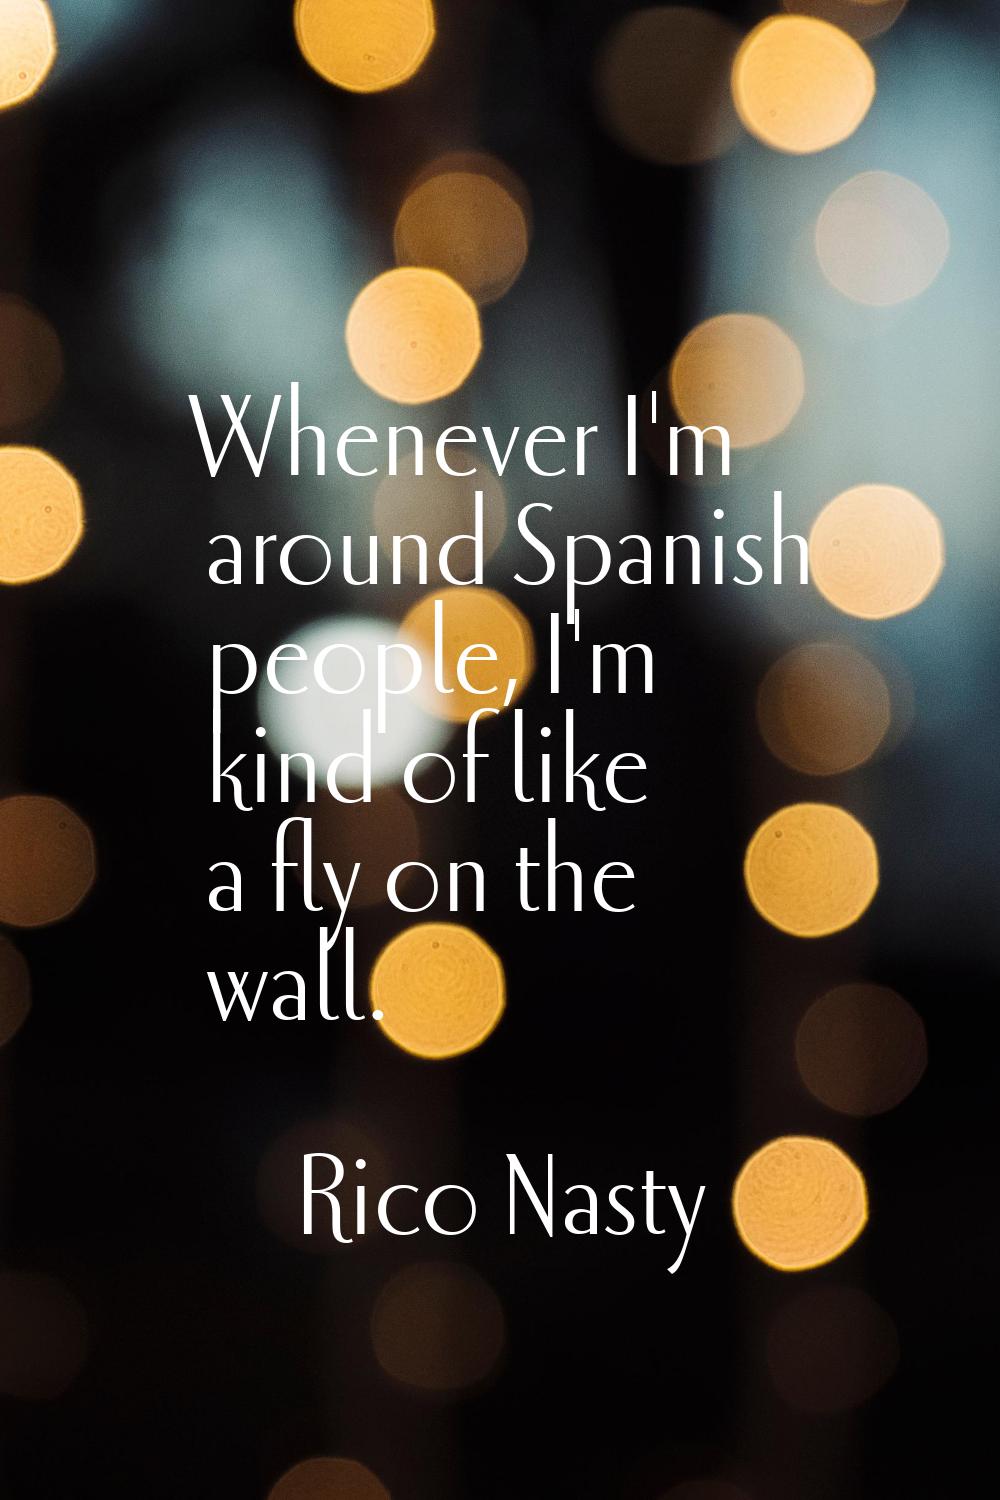 Whenever I'm around Spanish people, I'm kind of like a fly on the wall.